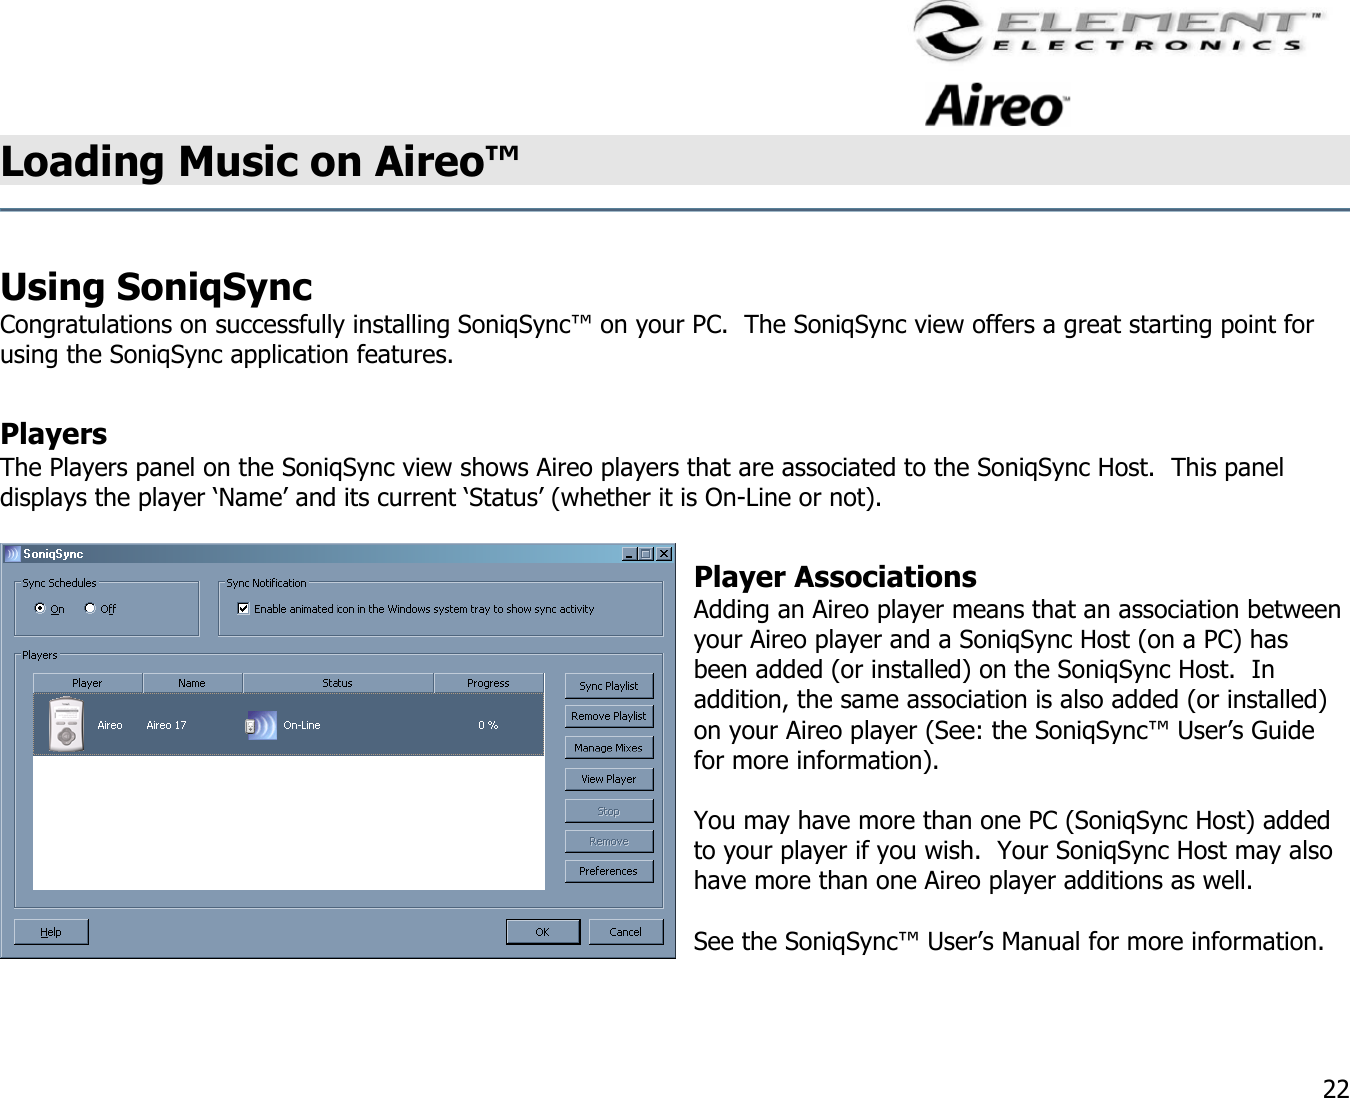                                                                                    22 Loading Music on Aireo™   Using SoniqSync  Congratulations on successfully installing SoniqSync™ on your PC.  The SoniqSync view offers a great starting point for using the SoniqSync application features.    Players The Players panel on the SoniqSync view shows Aireo players that are associated to the SoniqSync Host.  This panel displays the player ‘Name’ and its current ‘Status’ (whether it is On-Line or not).  Player Associations Adding an Aireo player means that an association between your Aireo player and a SoniqSync Host (on a PC) has been added (or installed) on the SoniqSync Host.  In addition, the same association is also added (or installed) on your Aireo player (See: the SoniqSync™ User’s Guide for more information).  You may have more than one PC (SoniqSync Host) added to your player if you wish.  Your SoniqSync Host may also have more than one Aireo player additions as well.    See the SoniqSync™ User’s Manual for more information.  